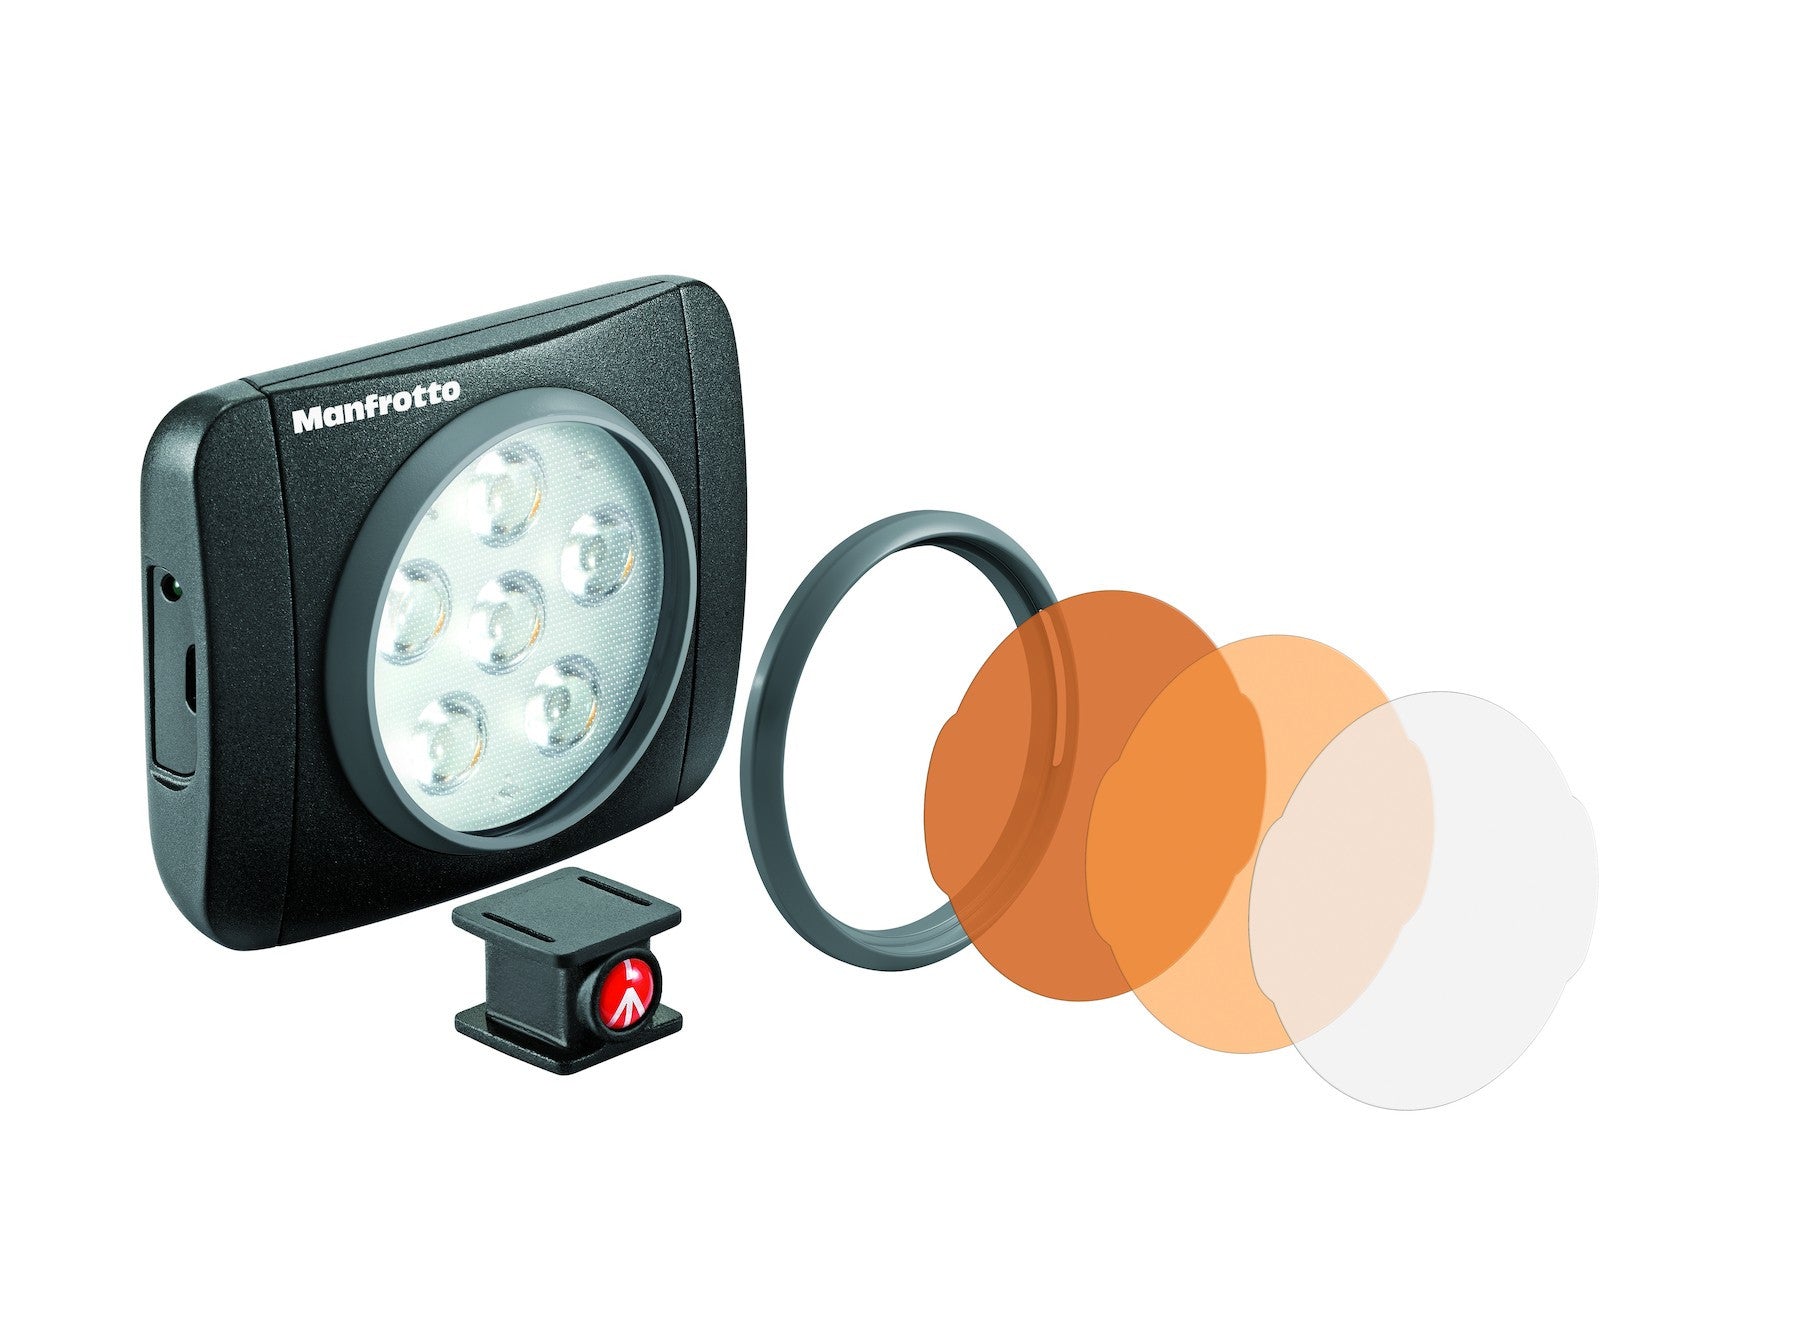 Manfrotto Lumie Series Art LED Light, lighting led lights, Manfrotto - Pictureline  - 1